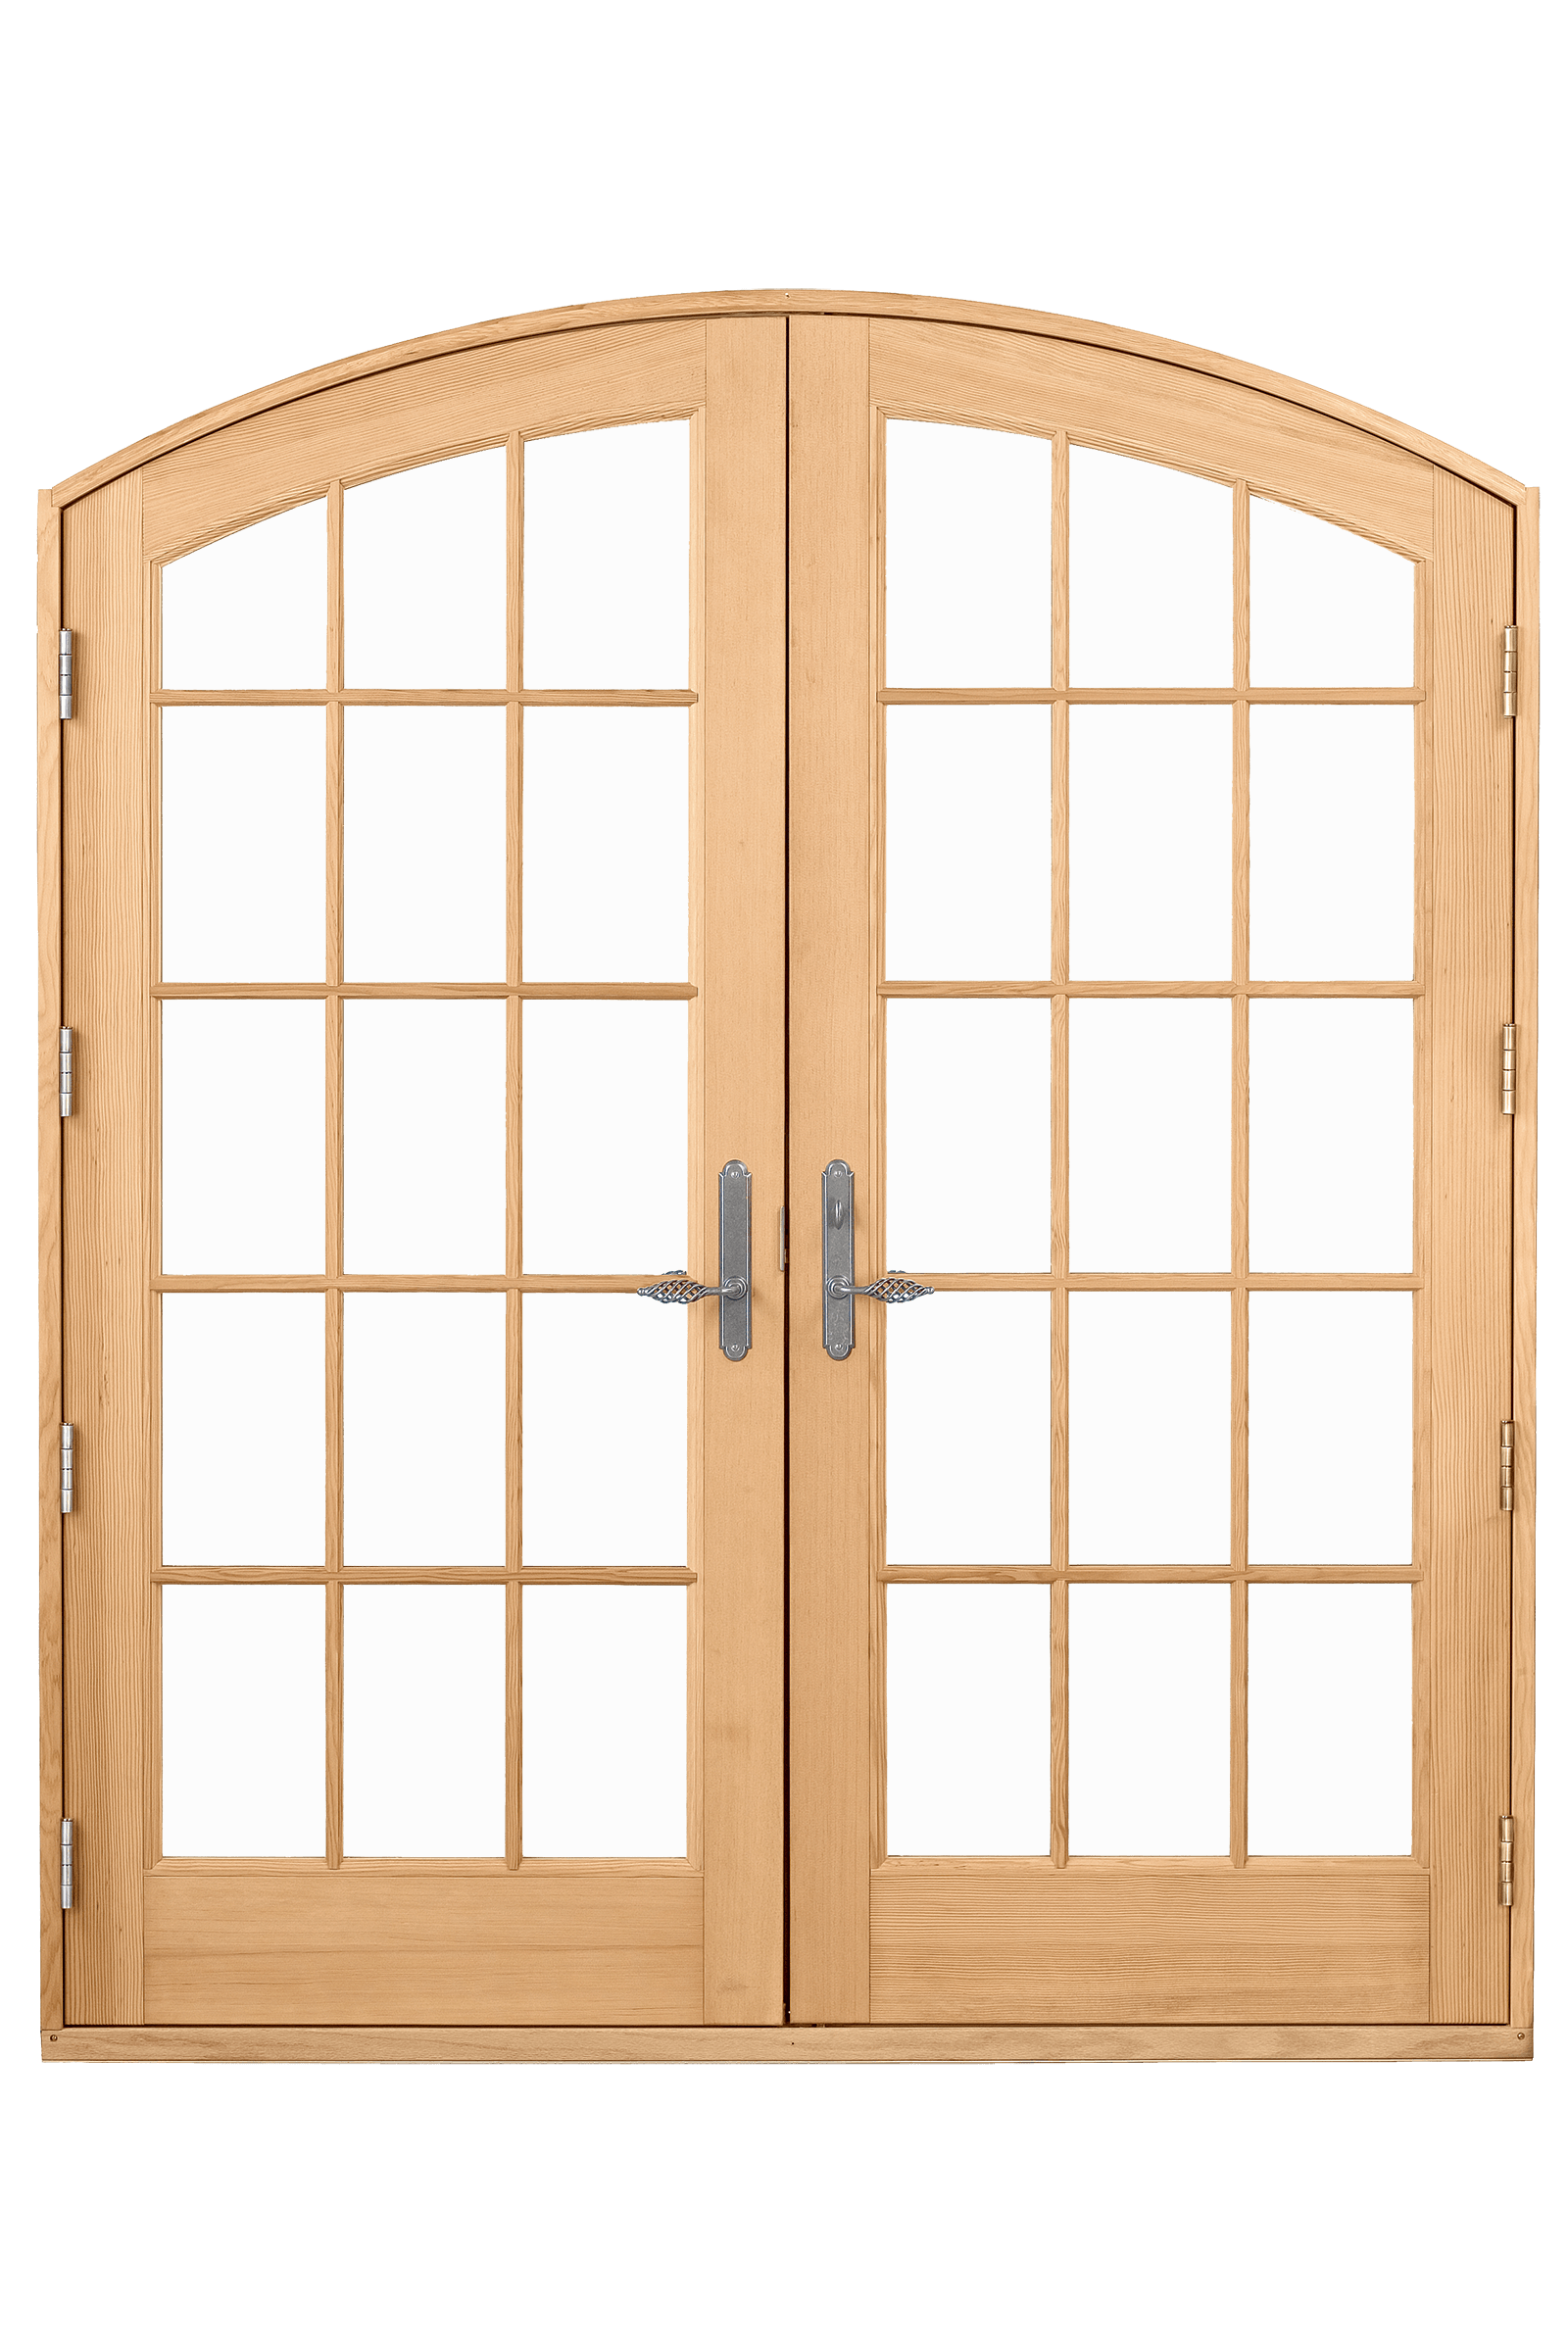 Arched Interior French Doors - Photos